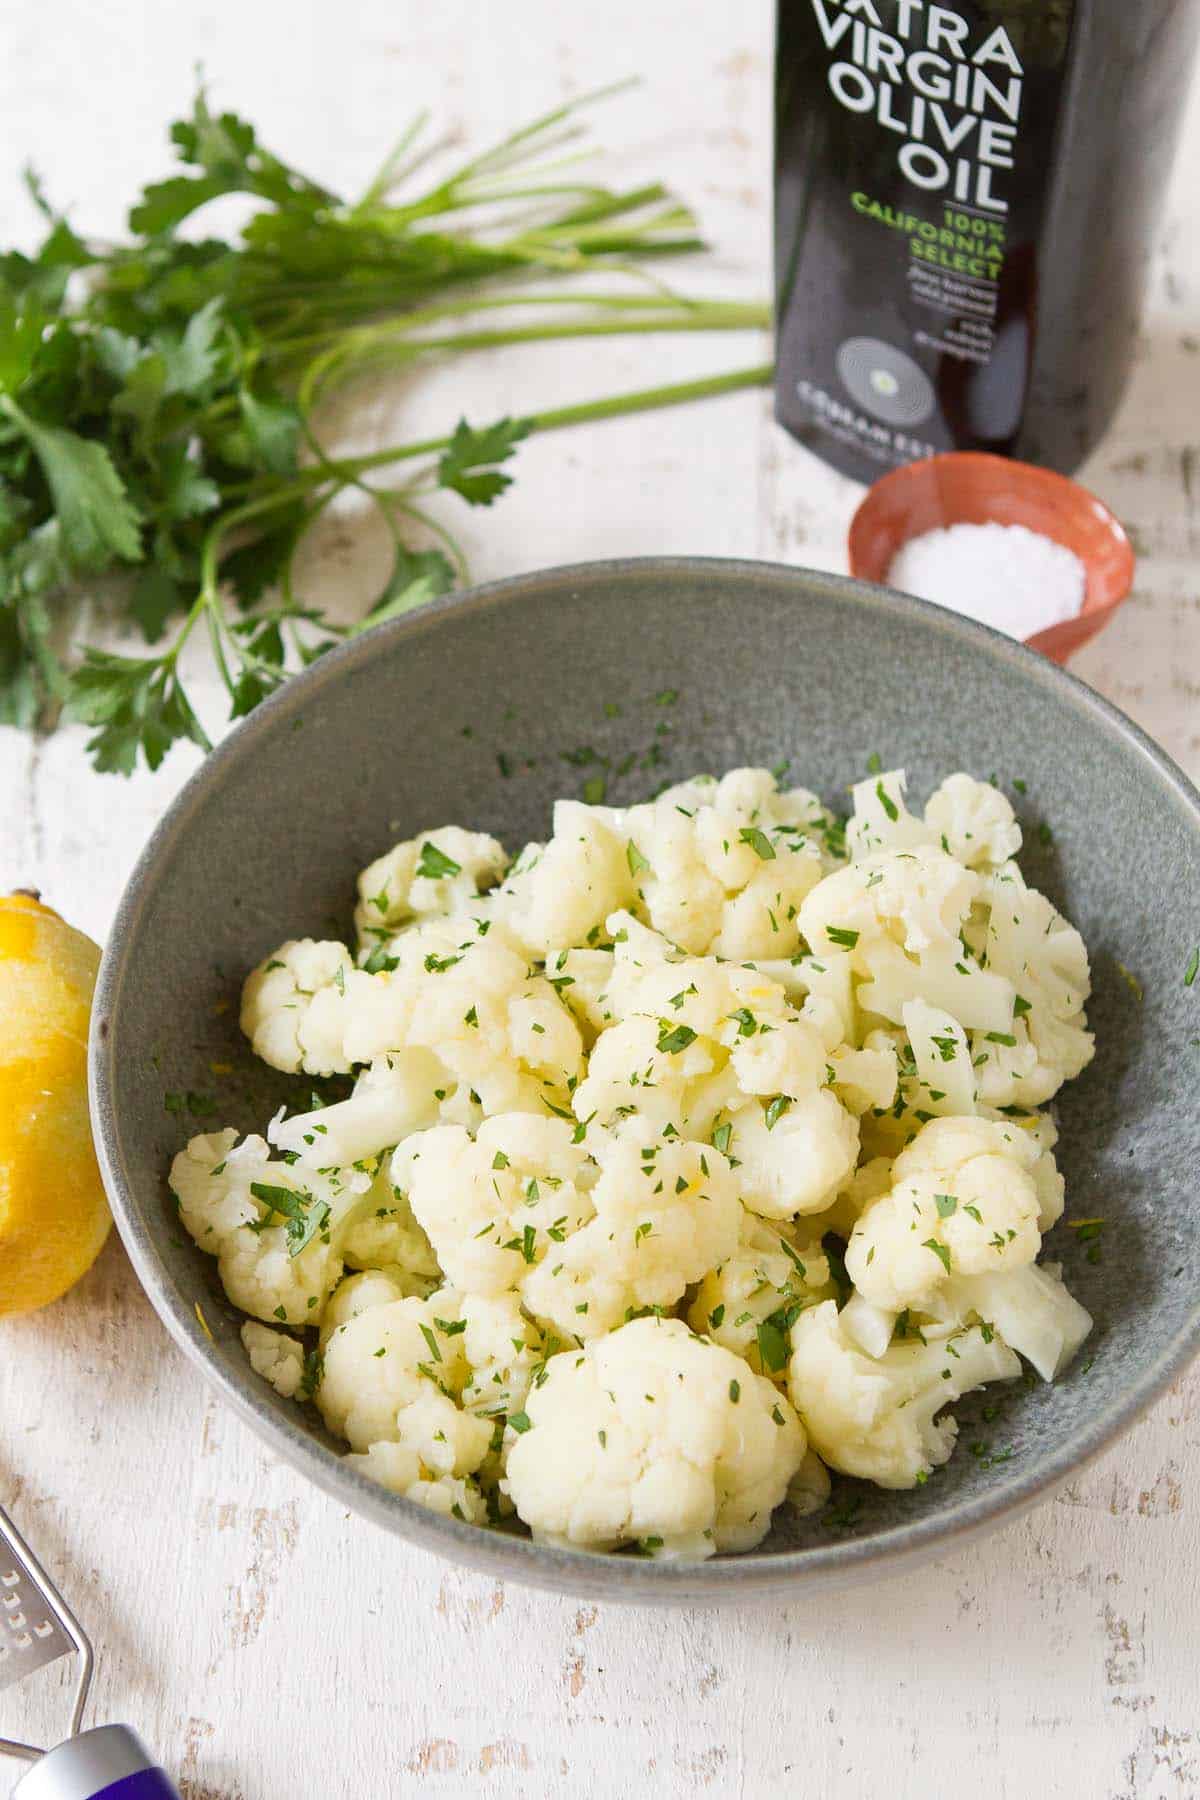 Steamed cauliflower is a quick, easy and healthy side dish that can be prepared in minutes. Season it with fresh herbs and lemon for extra flavor. | Recipes | Toppings | On stove | In Microwave | Vegan | Plant-based